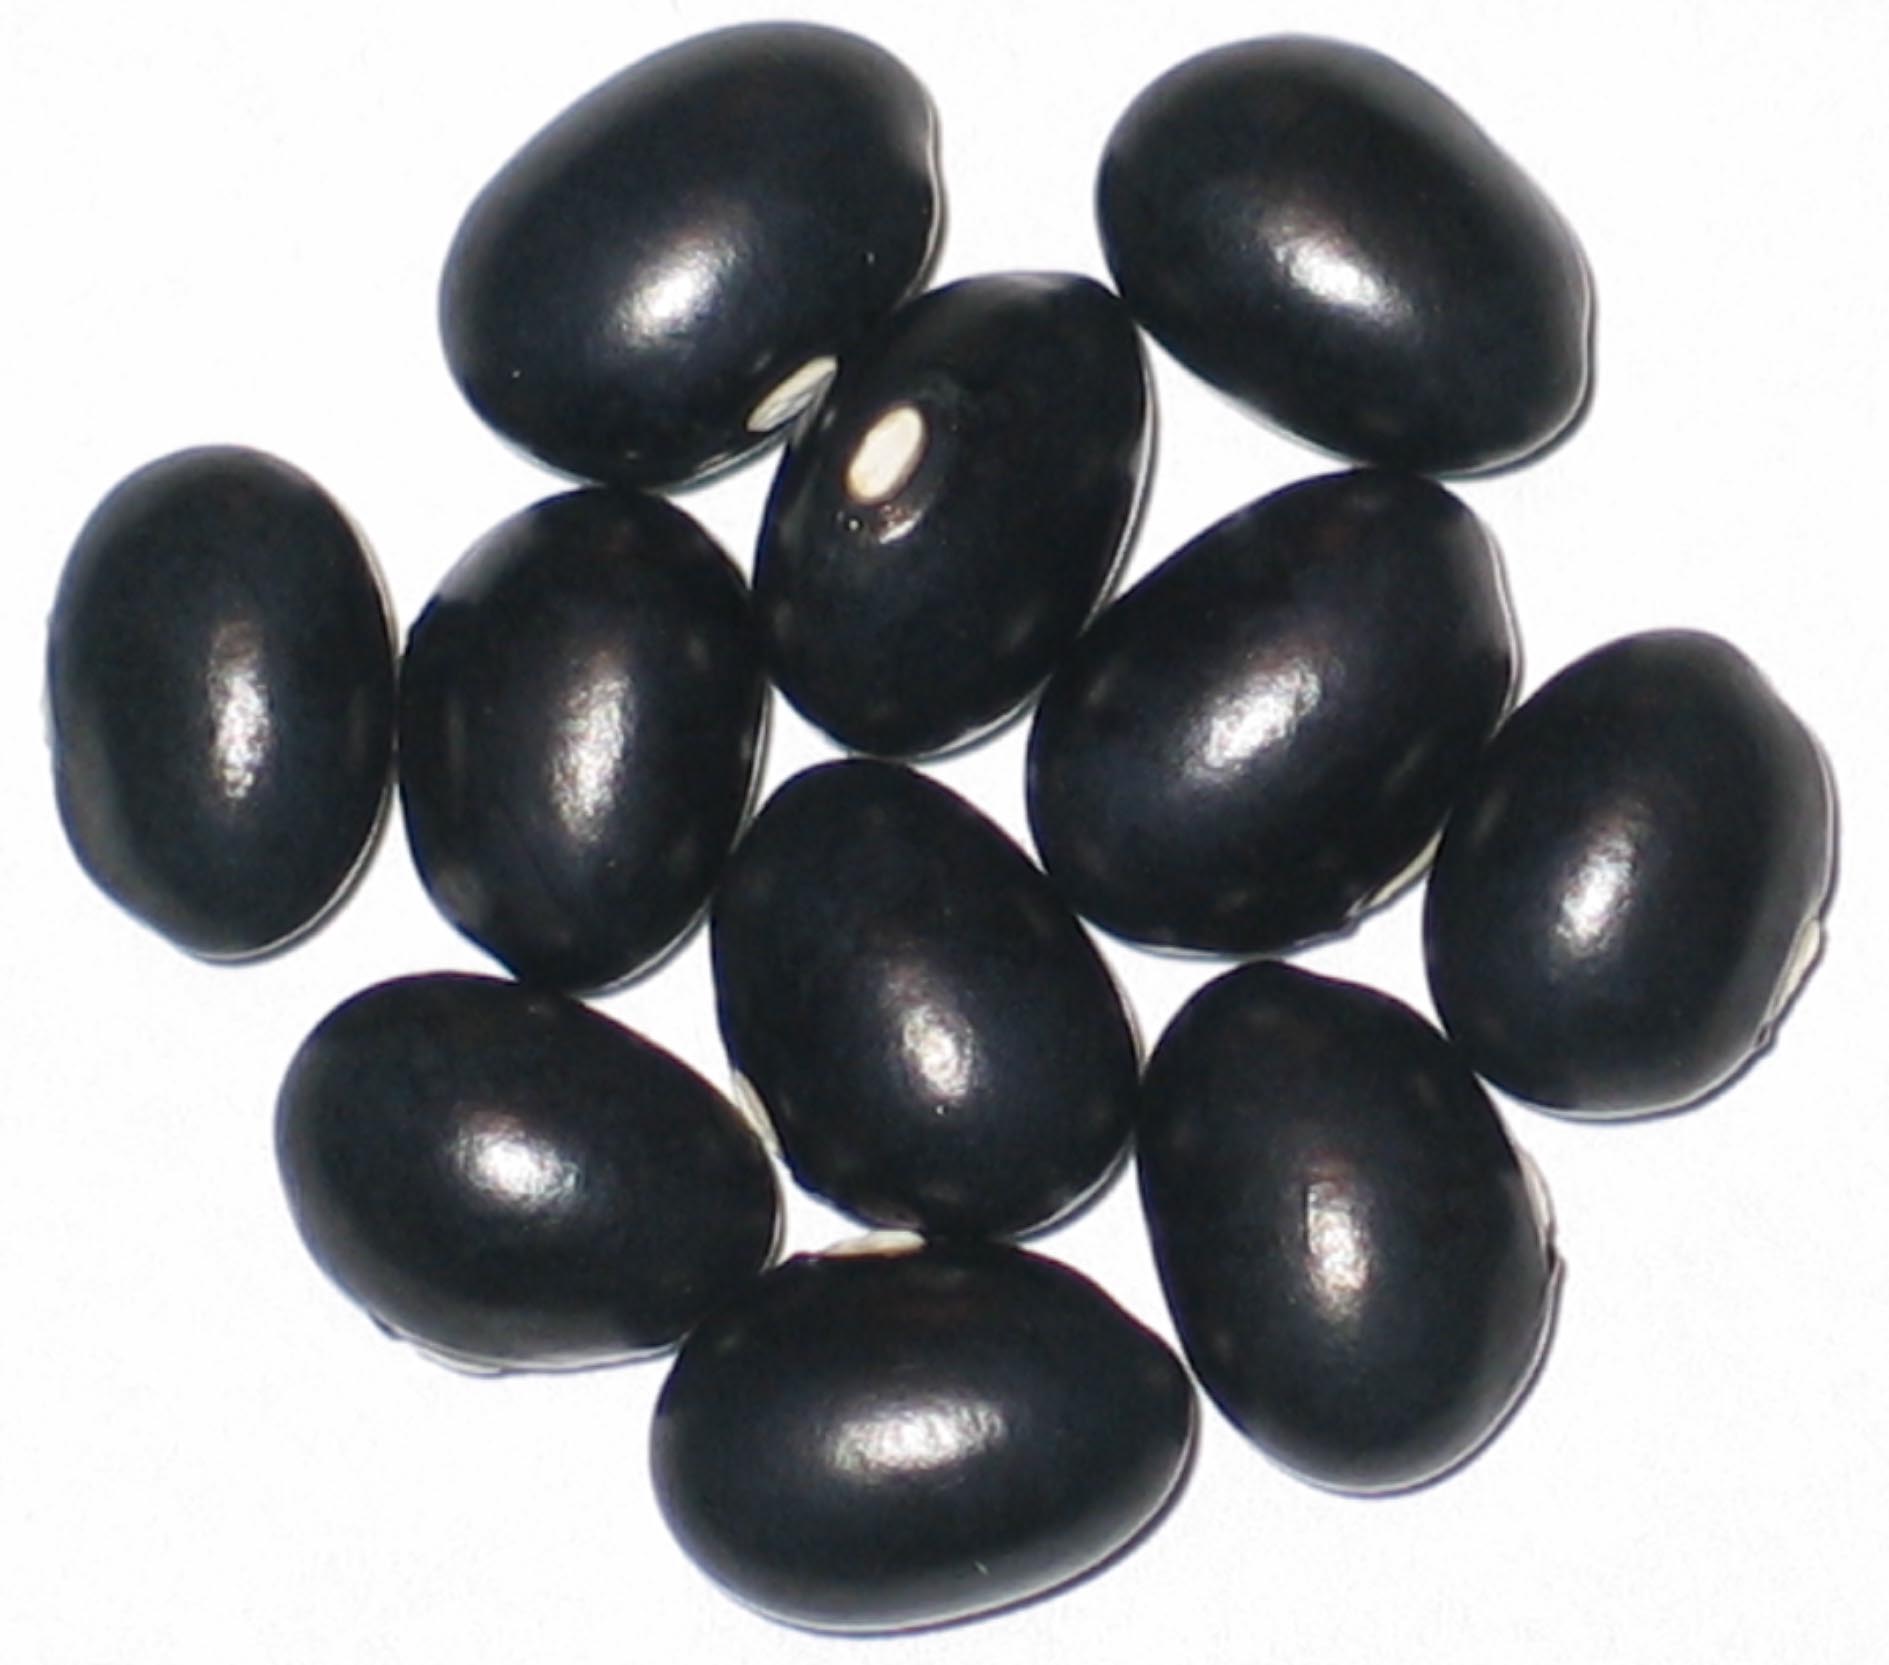 image of Black Coco beans